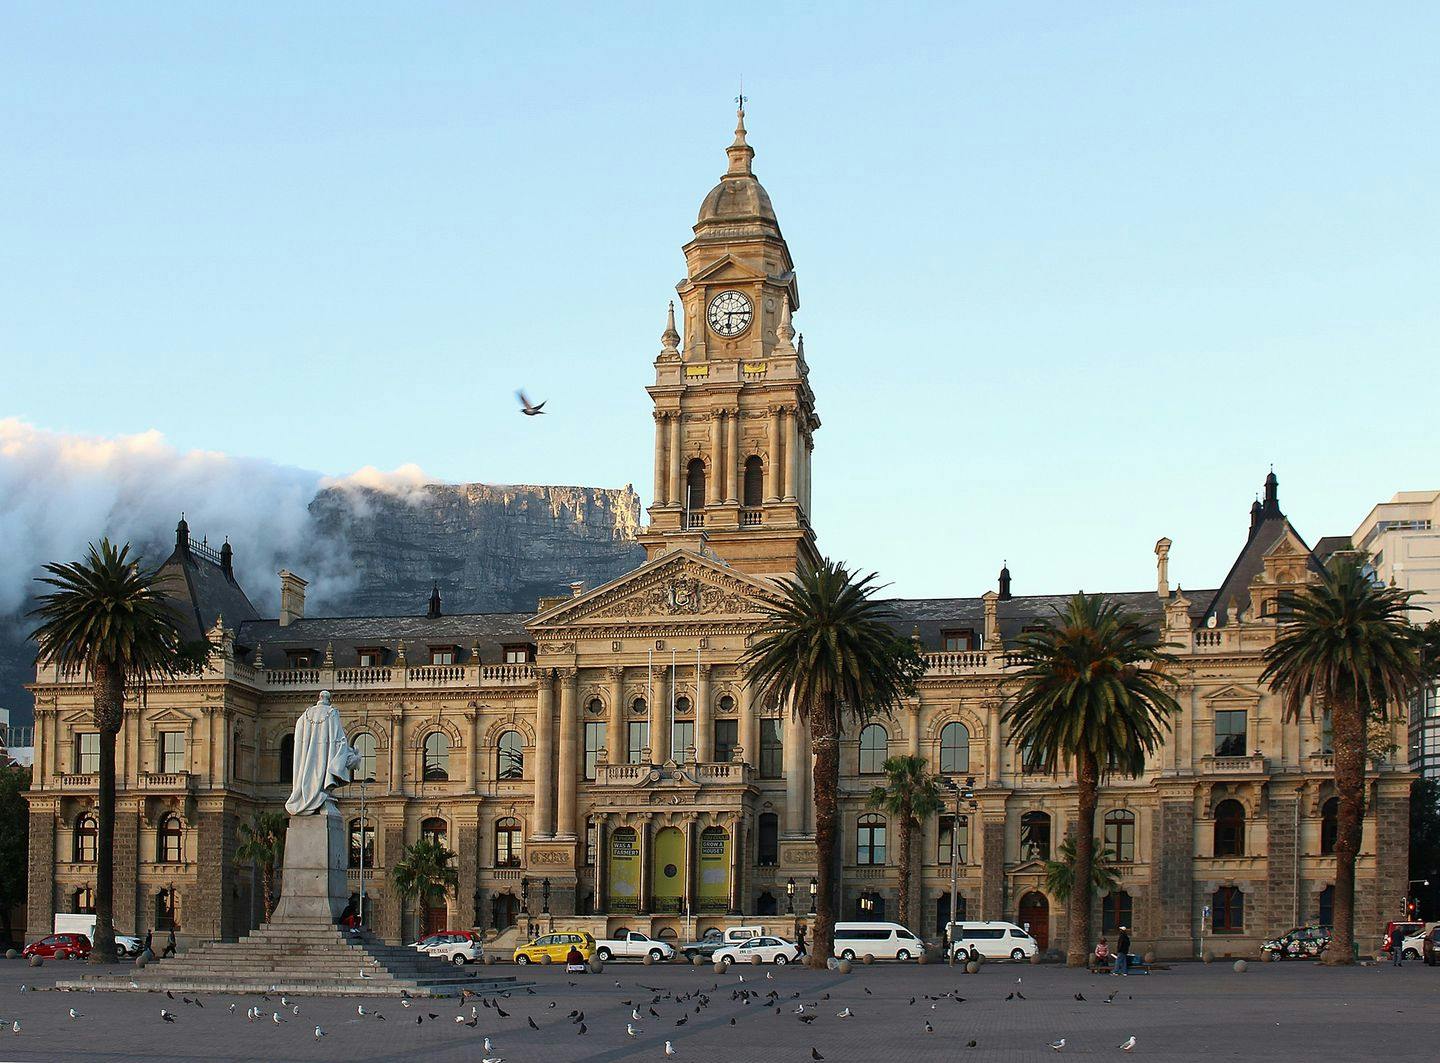 The Old Cape Town City Hall. Photo: Magemu / Wikimedia Commons